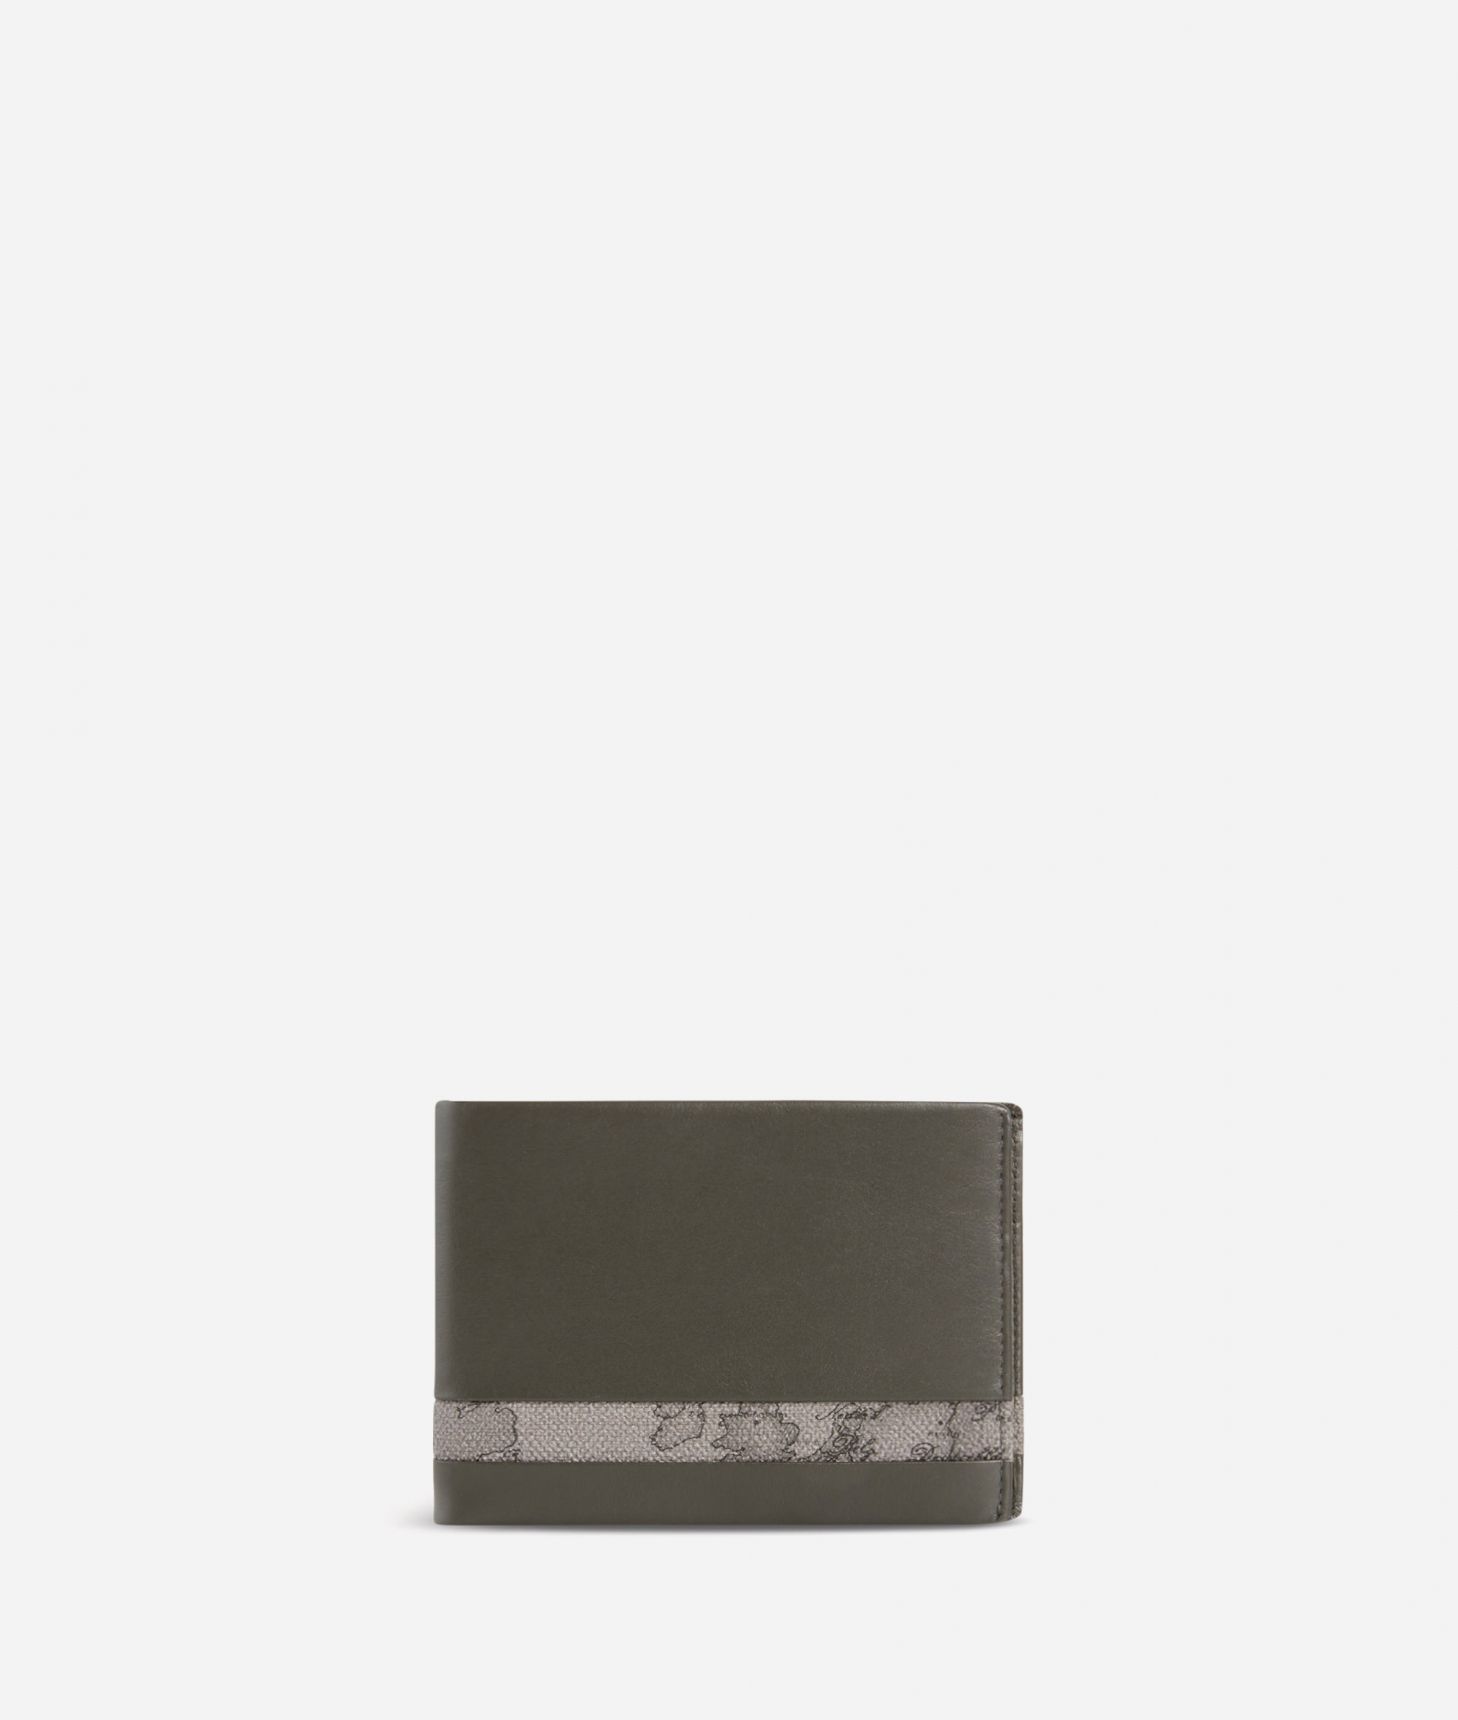 Small leather wallet Geo Dark fabric trims,front